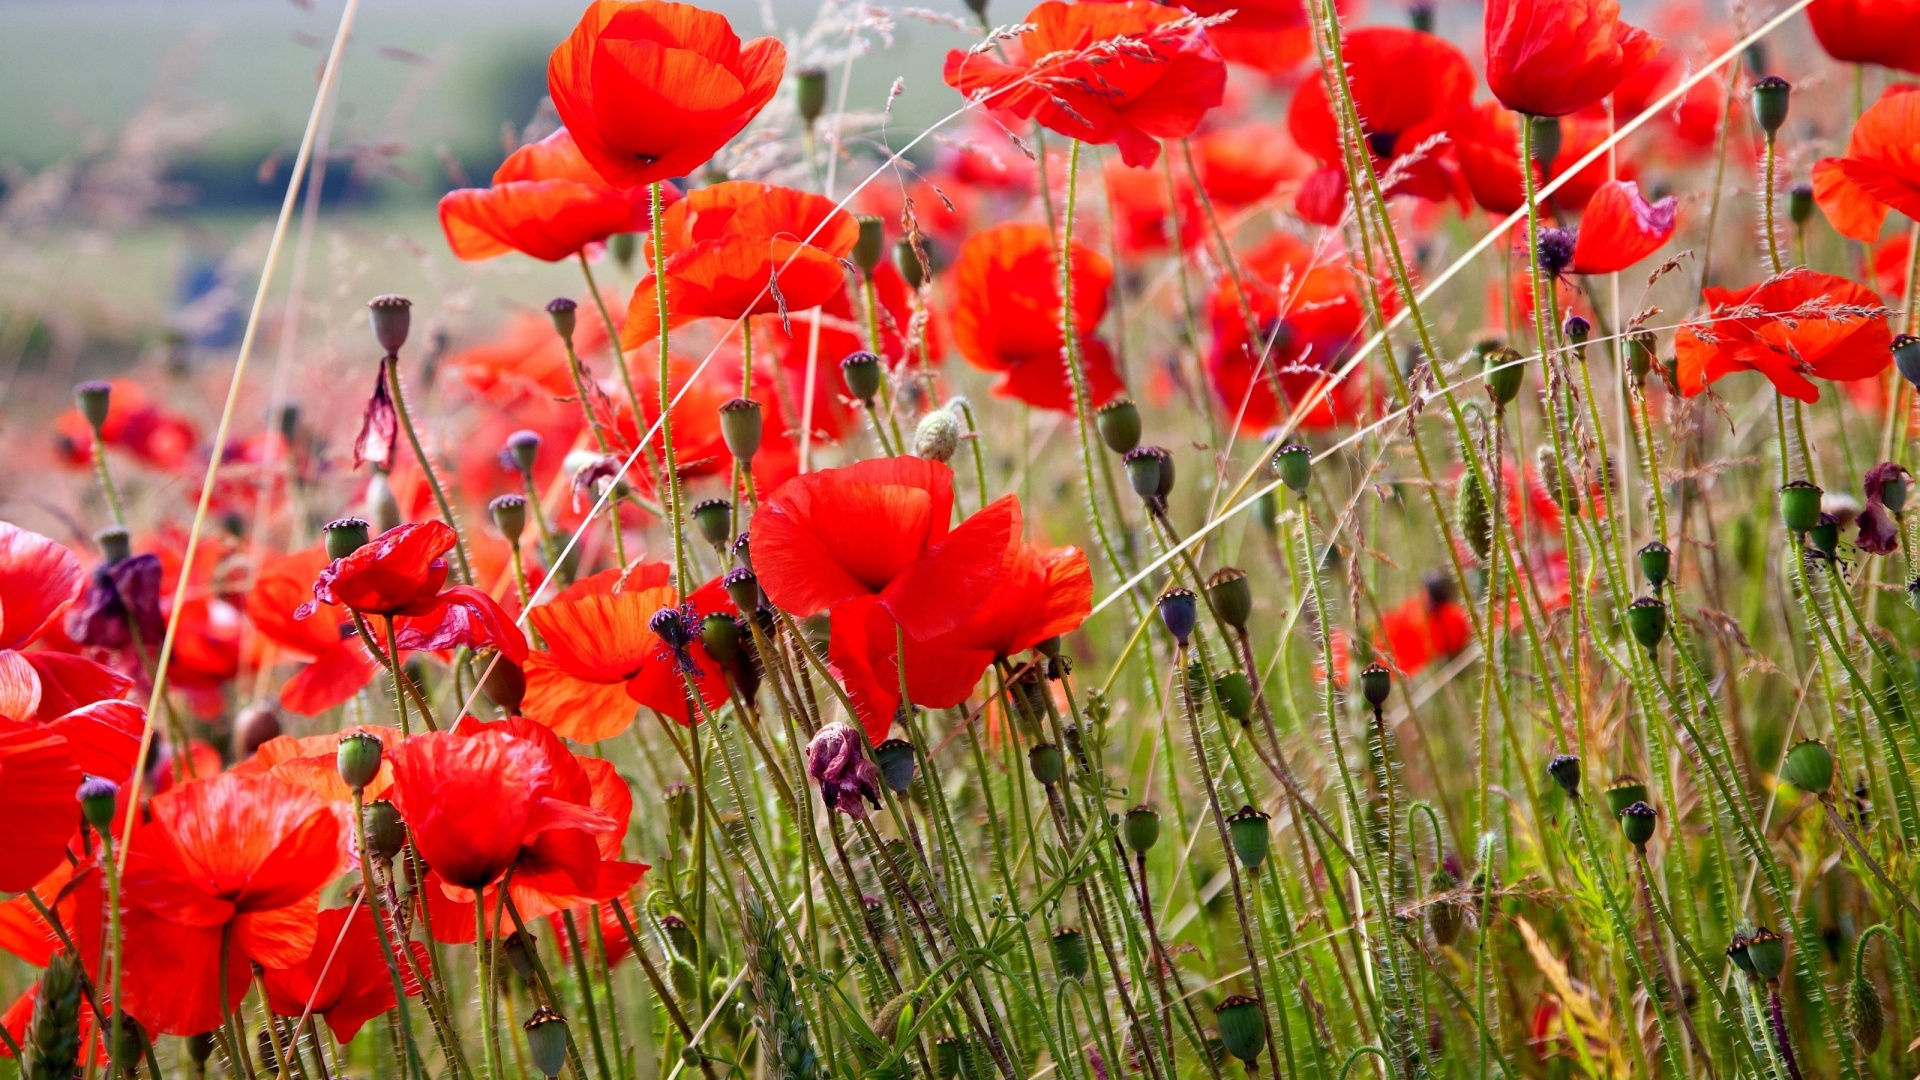 Red Flowers on Green Grass Field During Daytime. Wallpaper in 1920x1080 Resolution